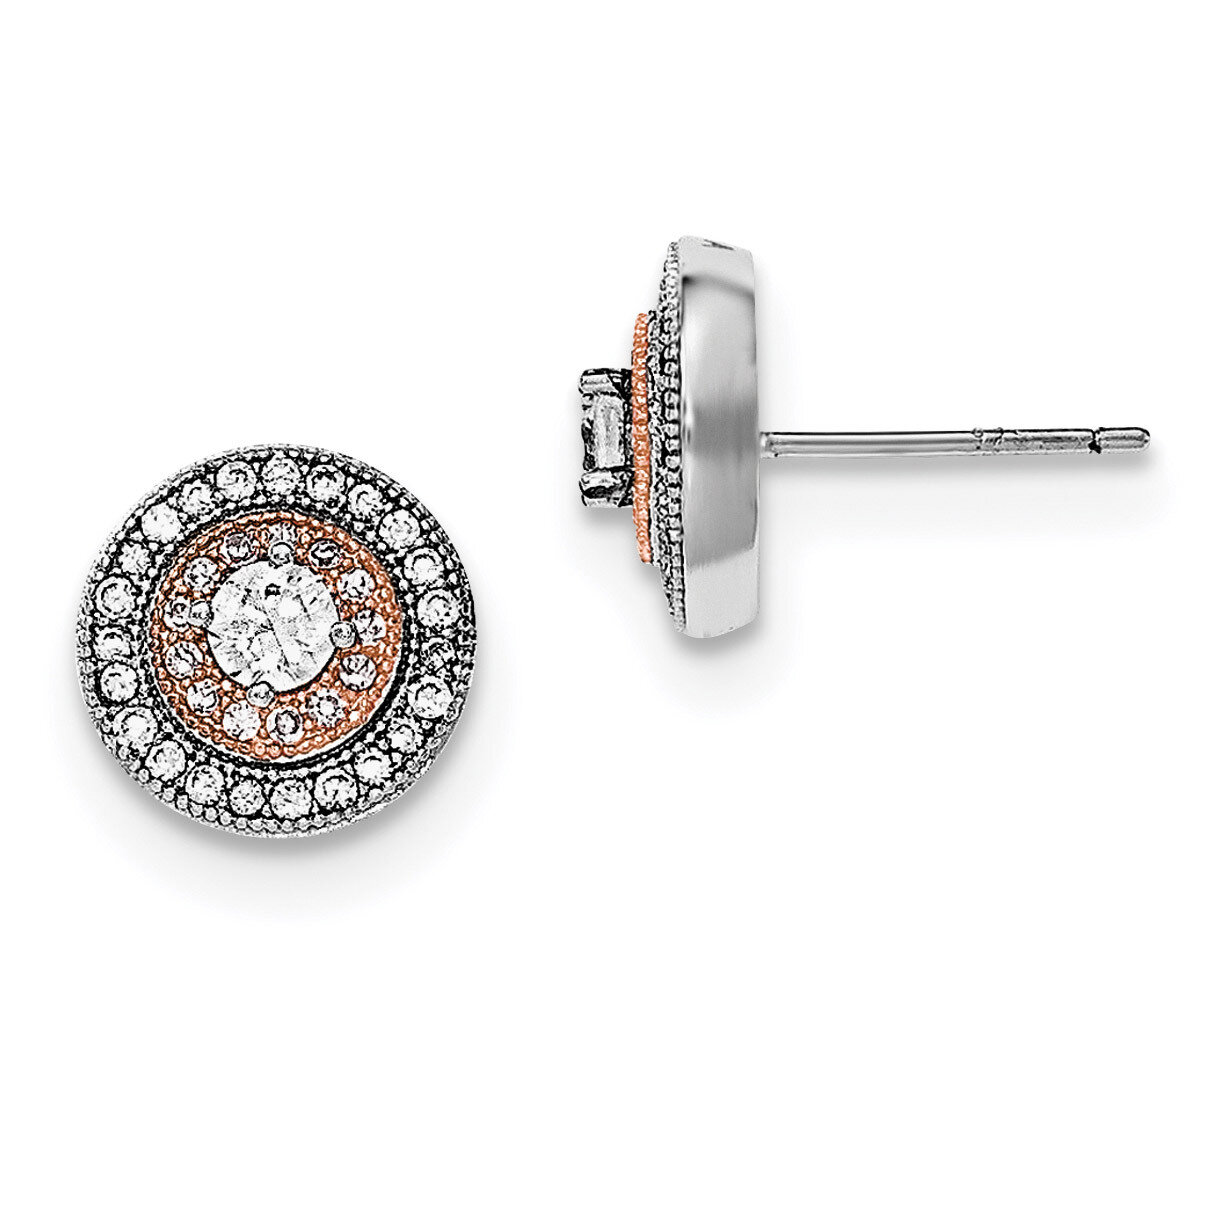 CZ Diamond with Rose Gold Plating Pave Post Earrings Sterling Silver Rhodium-plated QE12188